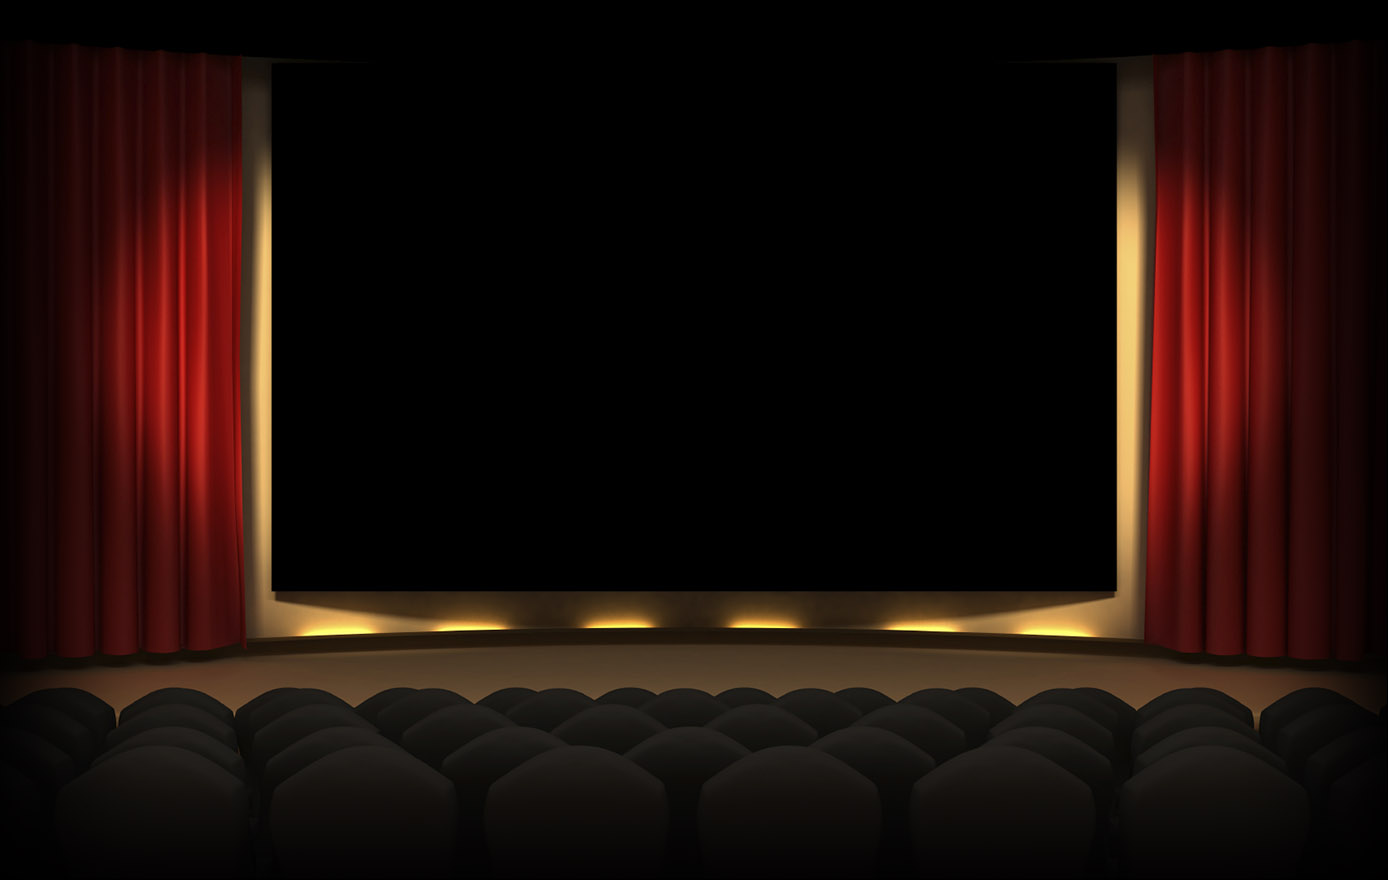 Free download Movie theater background for youtube videos Slideshows AV Shows [1388x880] for your Desktop, Mobile & Tablet. Explore Theater Background. Home Theater Wallpaper, Theater Wallpaper Background, Movie Theatre Wallpaper